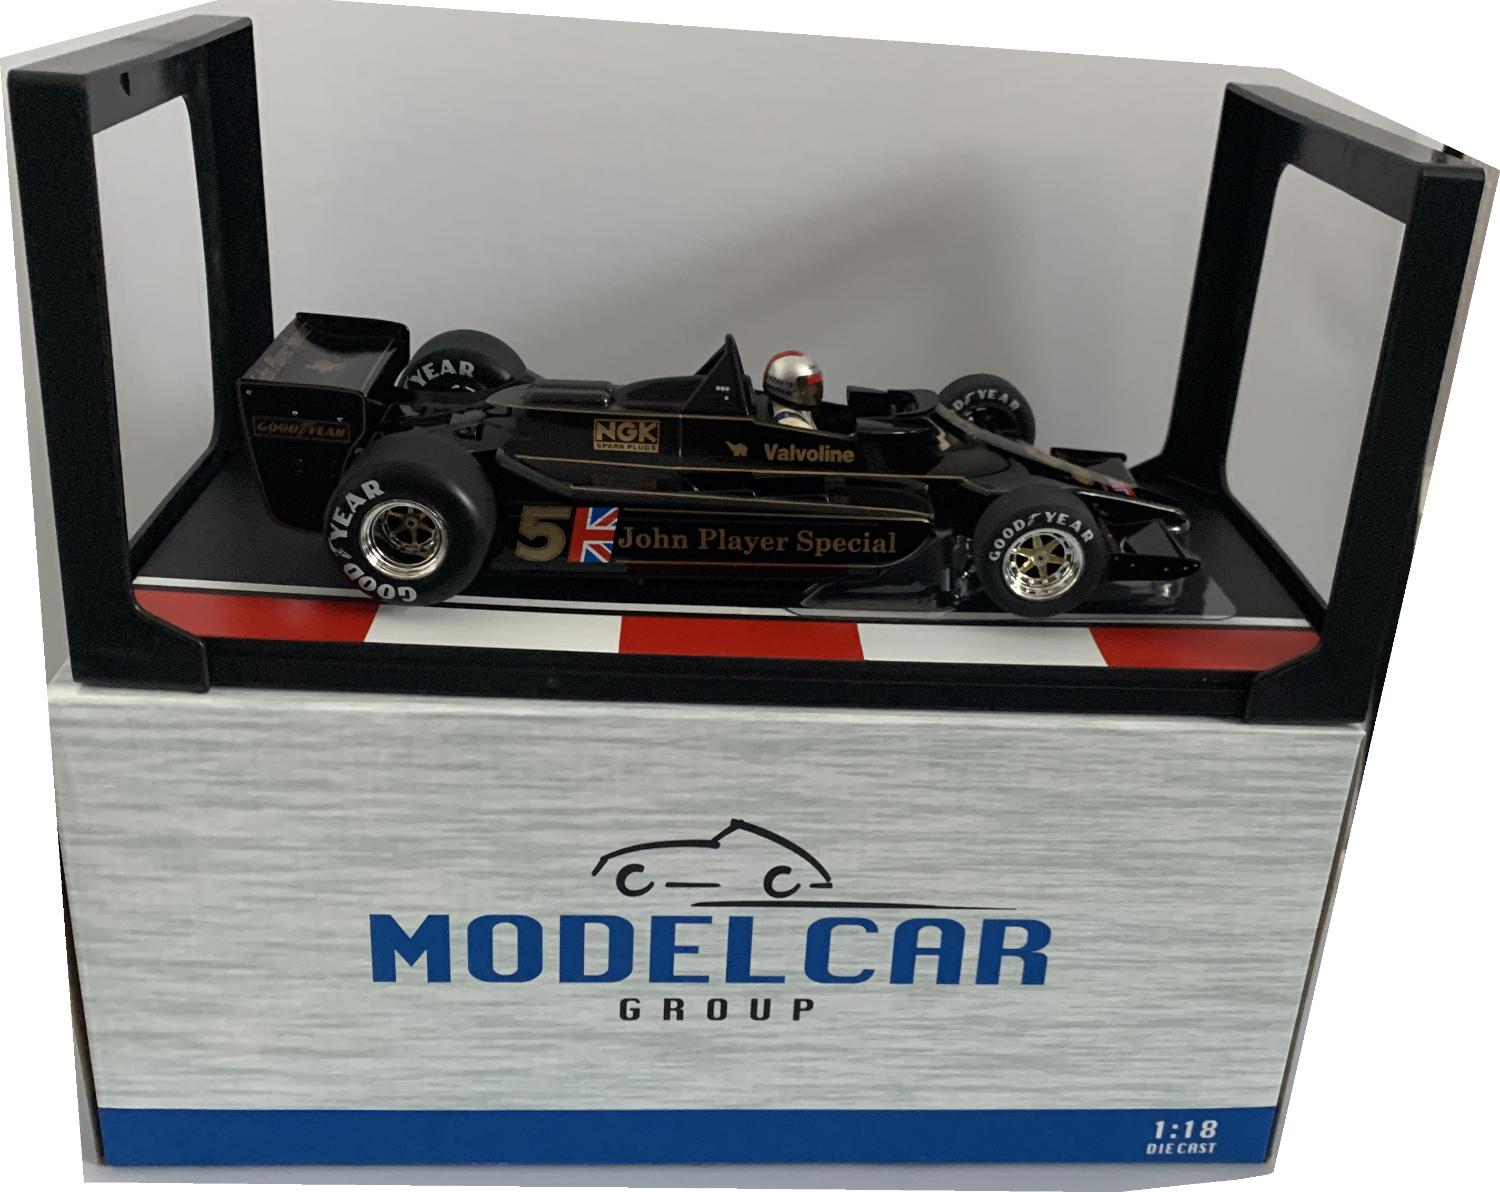 An excellent scale model of the Lotus Ford 79 with high level of detail throughout, all authentically recreated. Model is presented on a removable plinth and presented in a window display box.     The car is approx. 24.5 cm long and the presentation box is 31 cm long